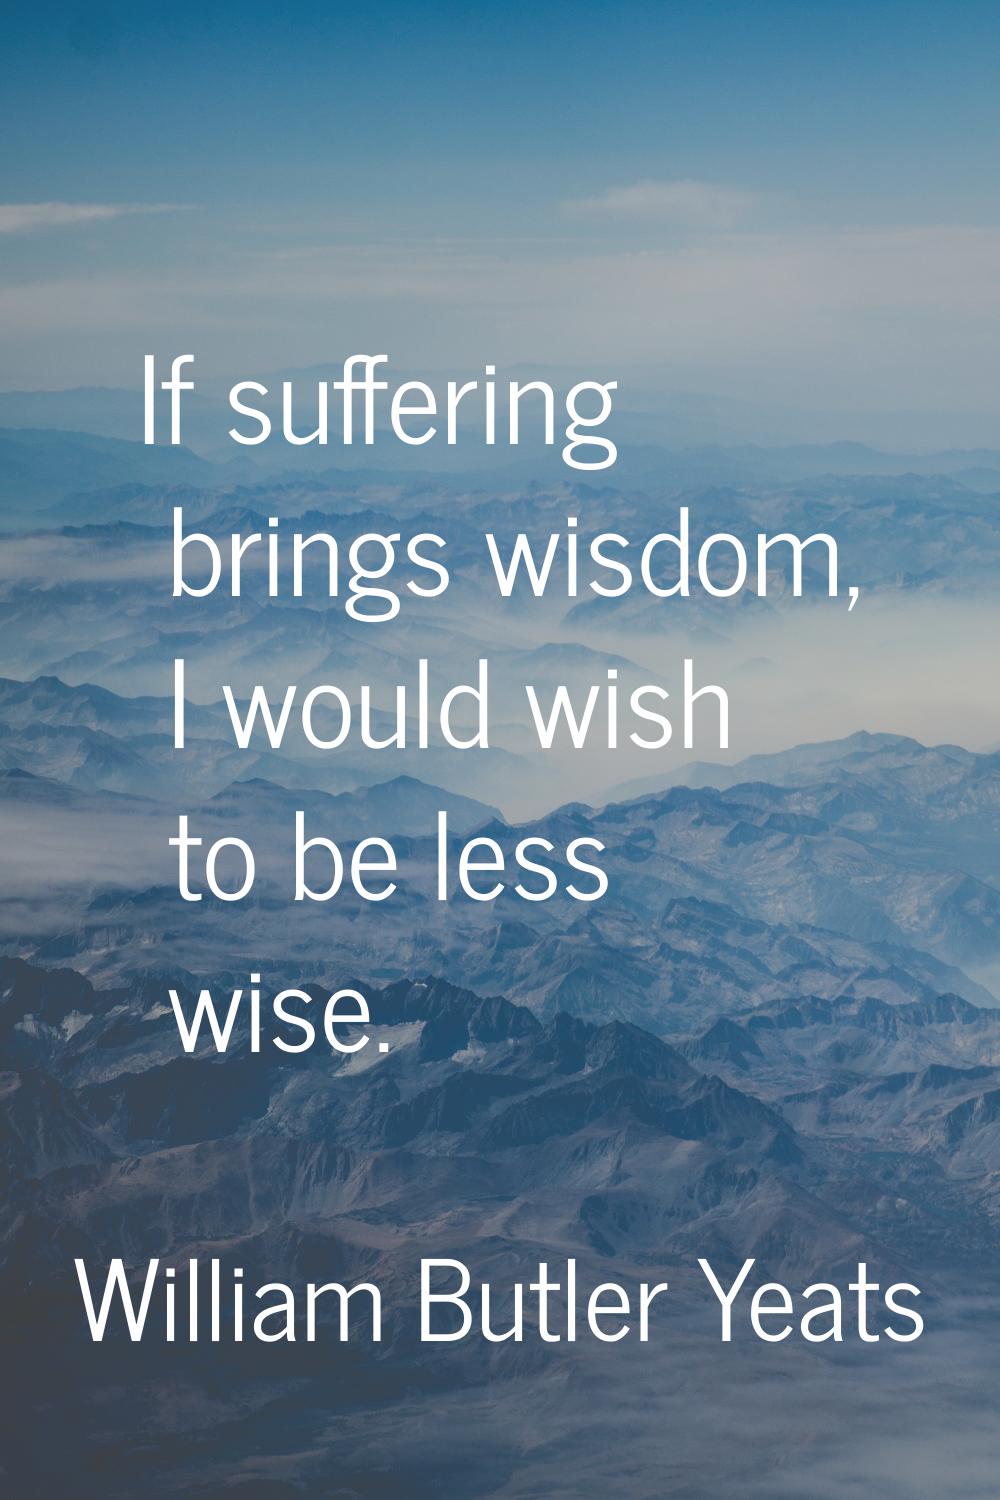 If suffering brings wisdom, I would wish to be less wise.